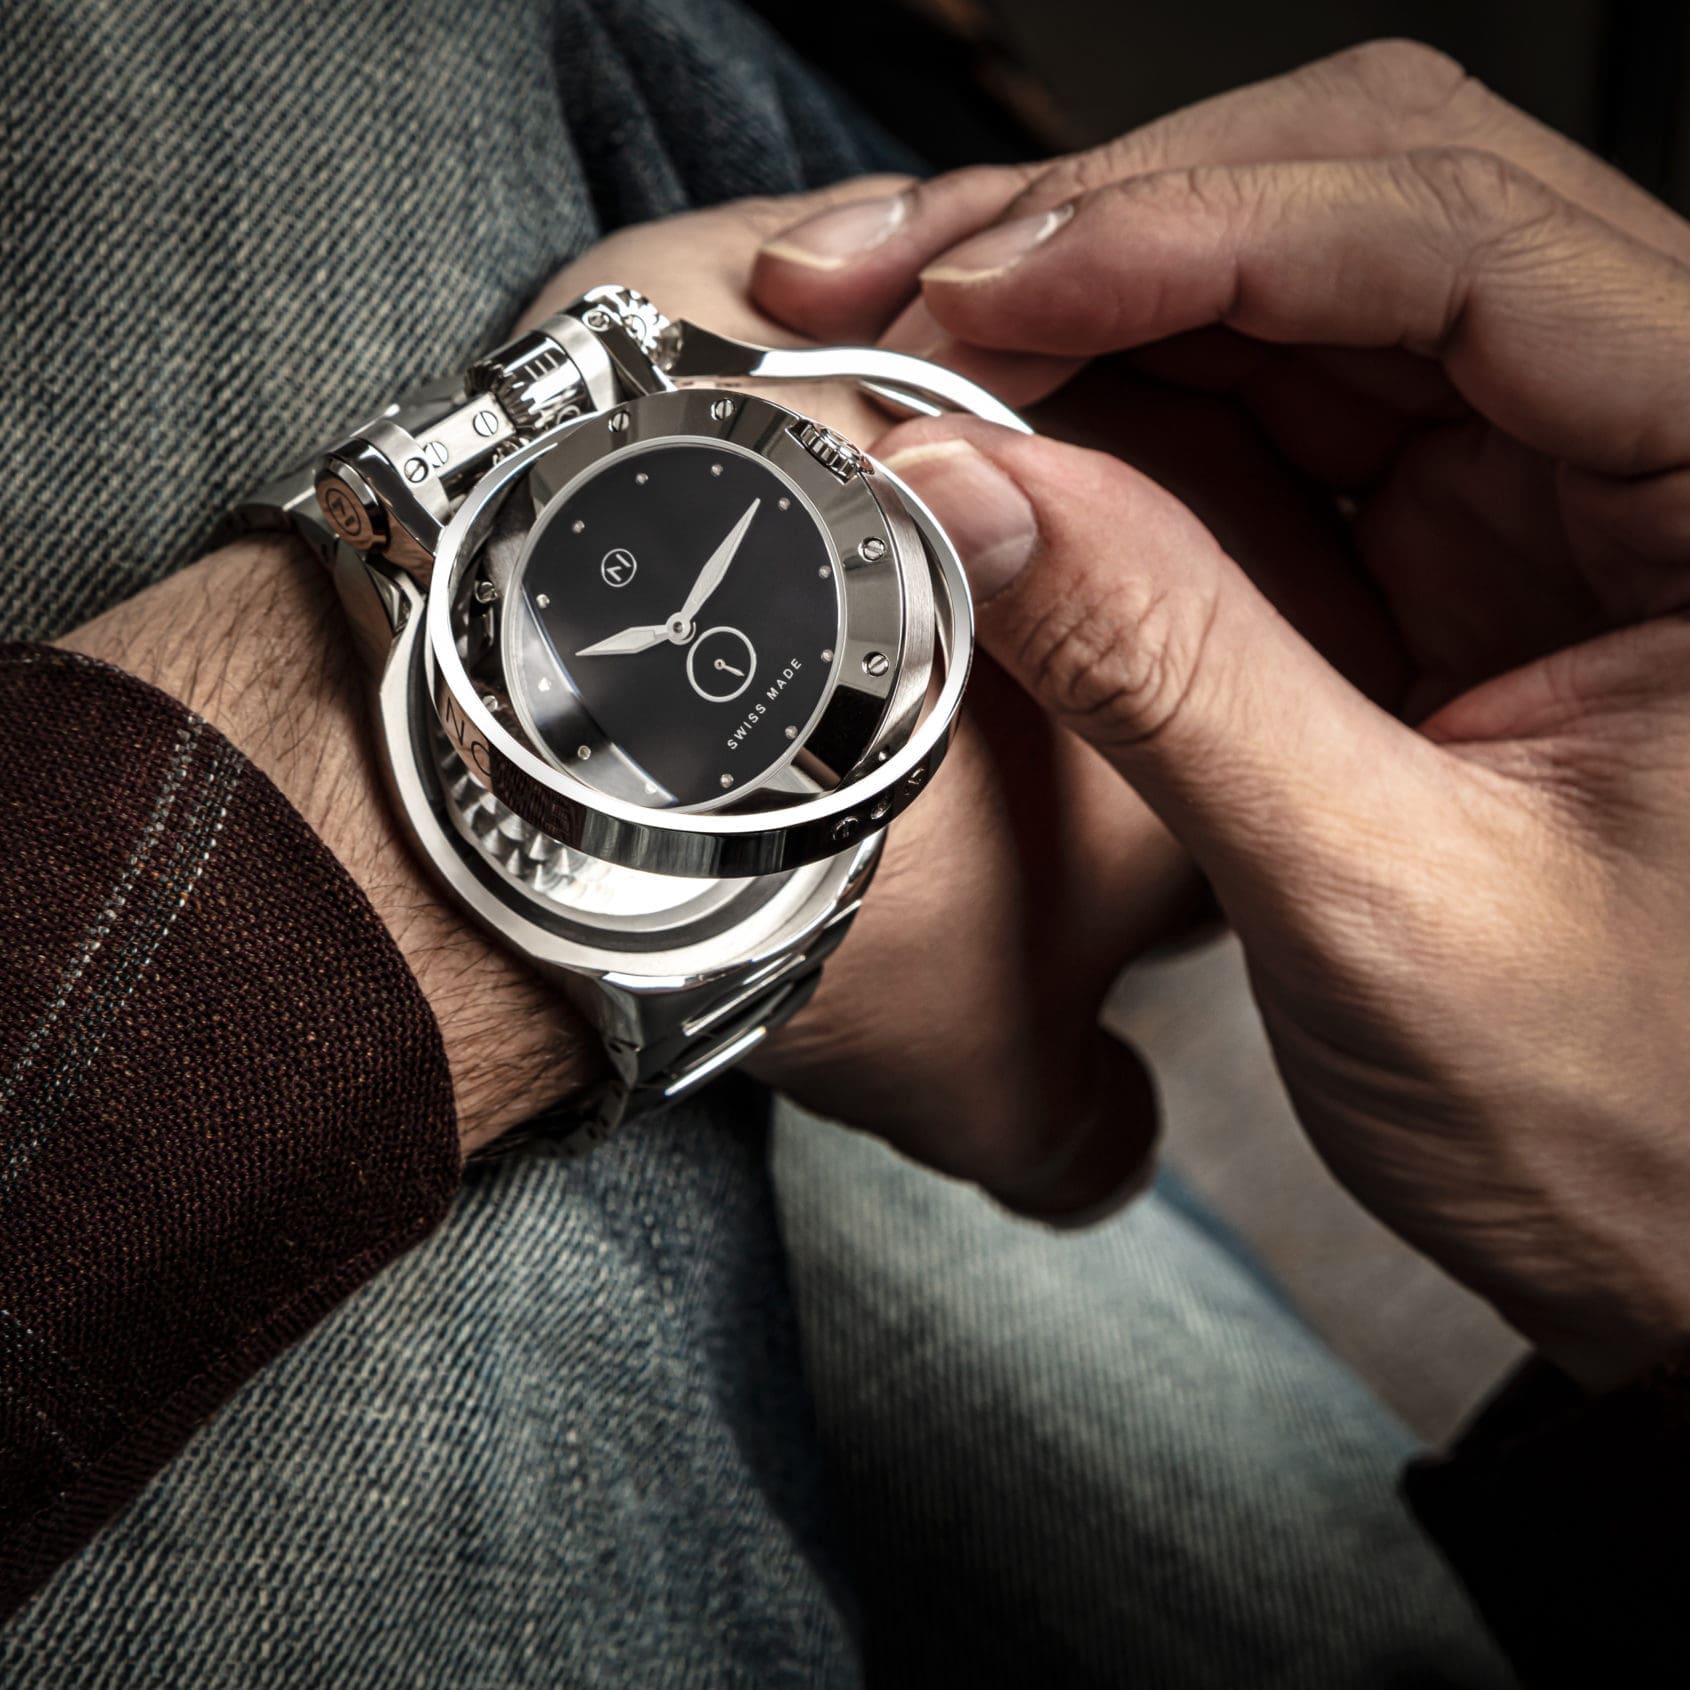 The NOVE Gemini is an elaborate alt take on a reversible-dial watch